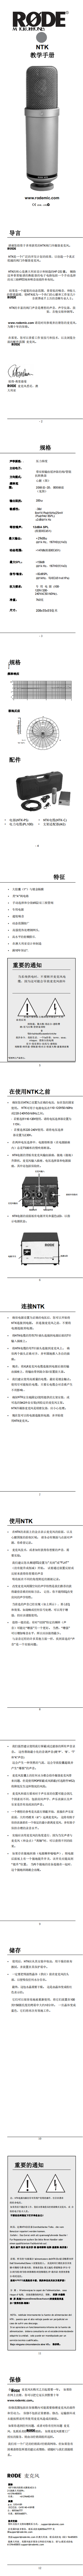 NTK_product_manual_1_12_translate_Chinese_0.png